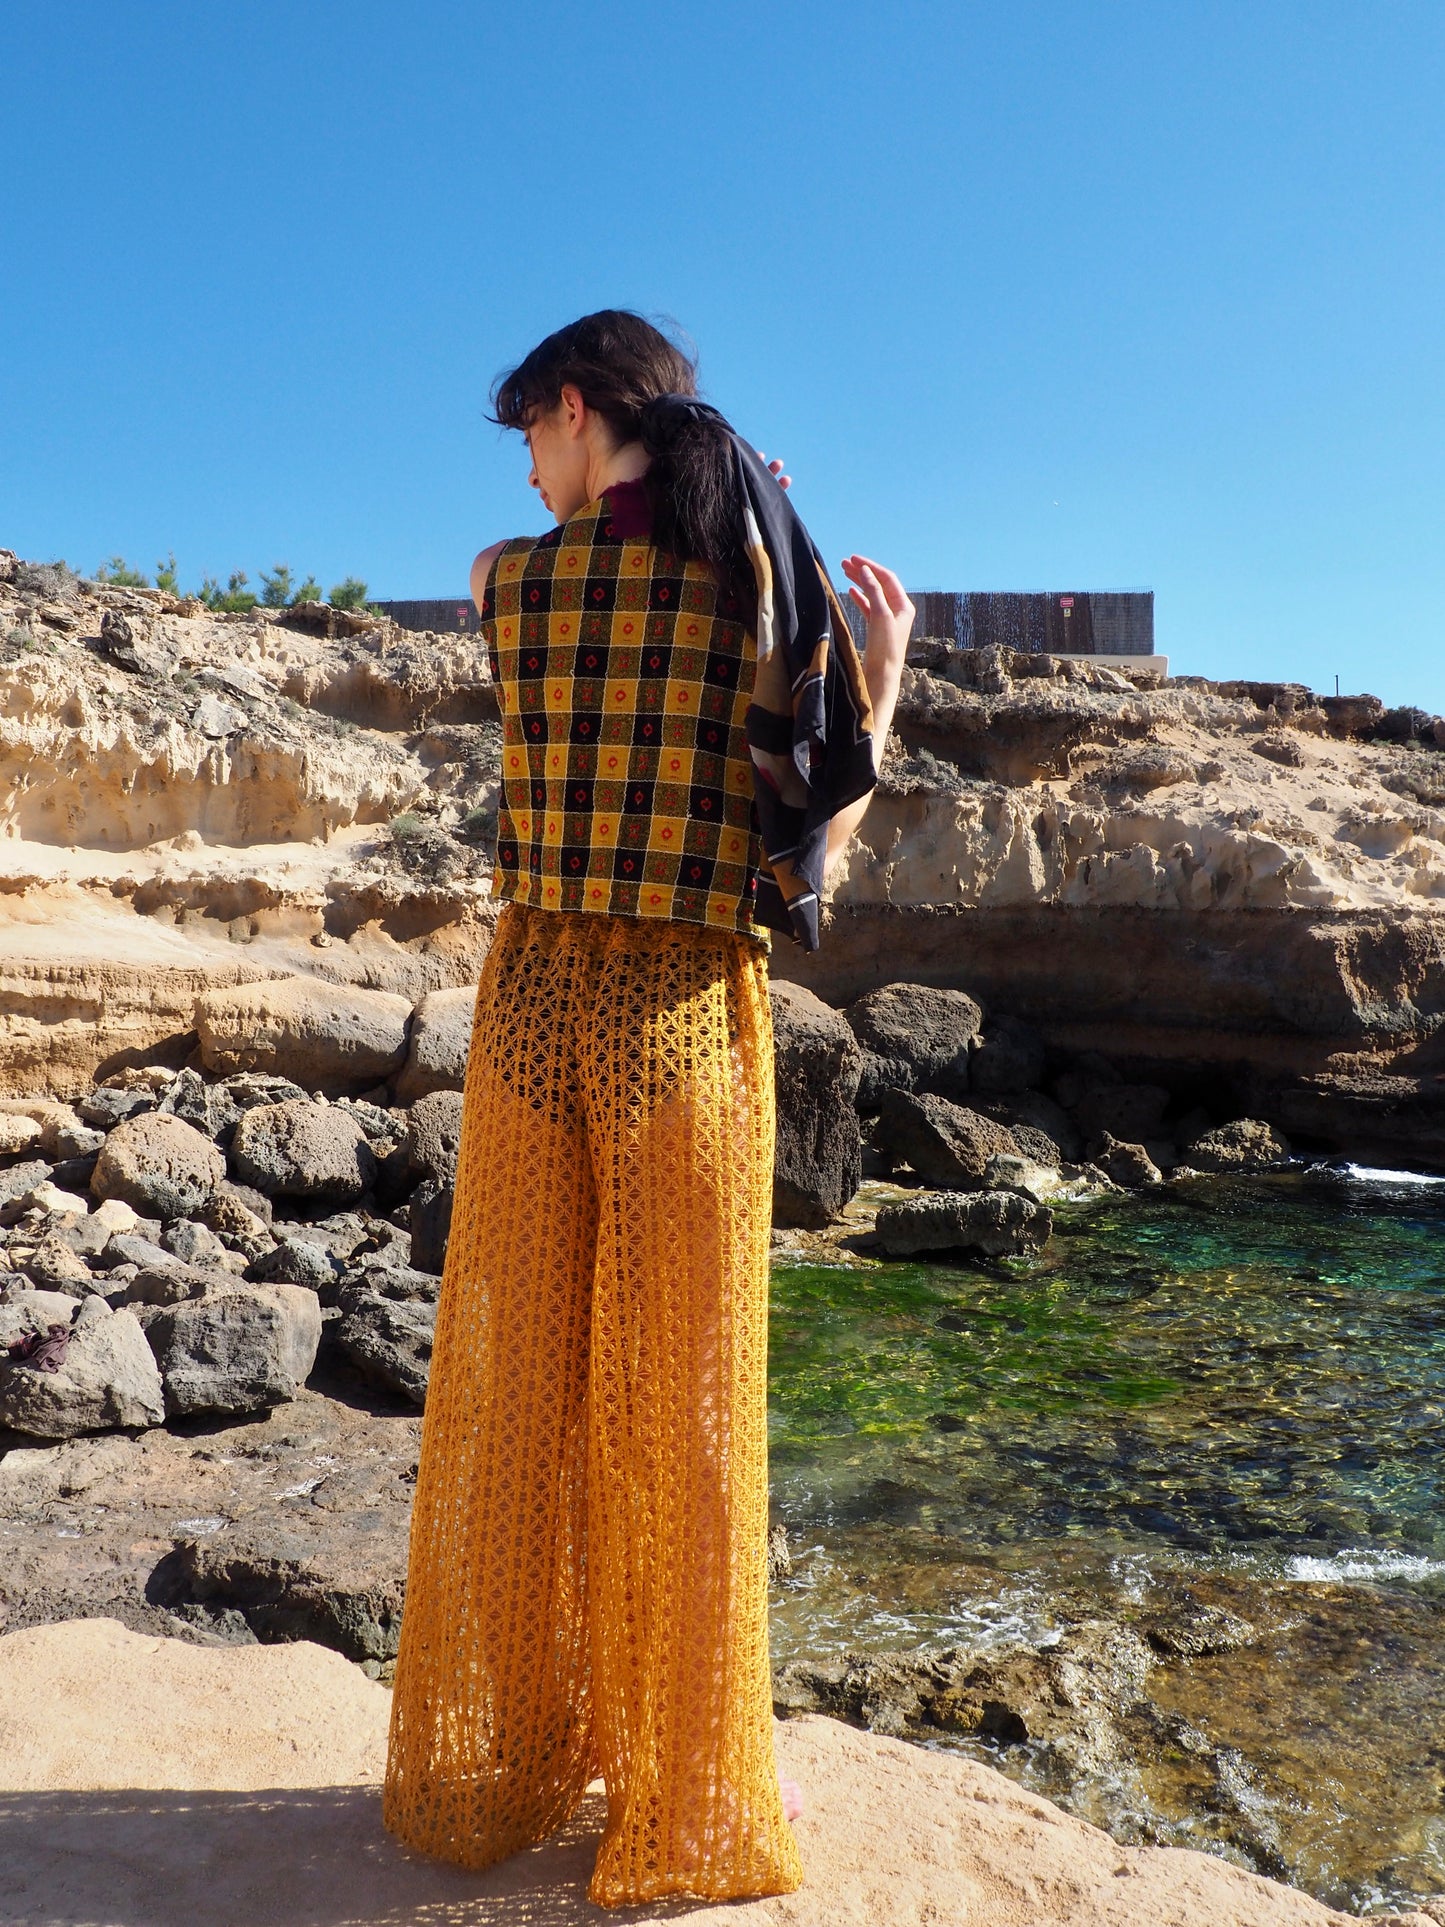 Up-cycled Mustard Yellow Wide-Leg Pants made from machine crochet textiles by Vagabond Ibiza